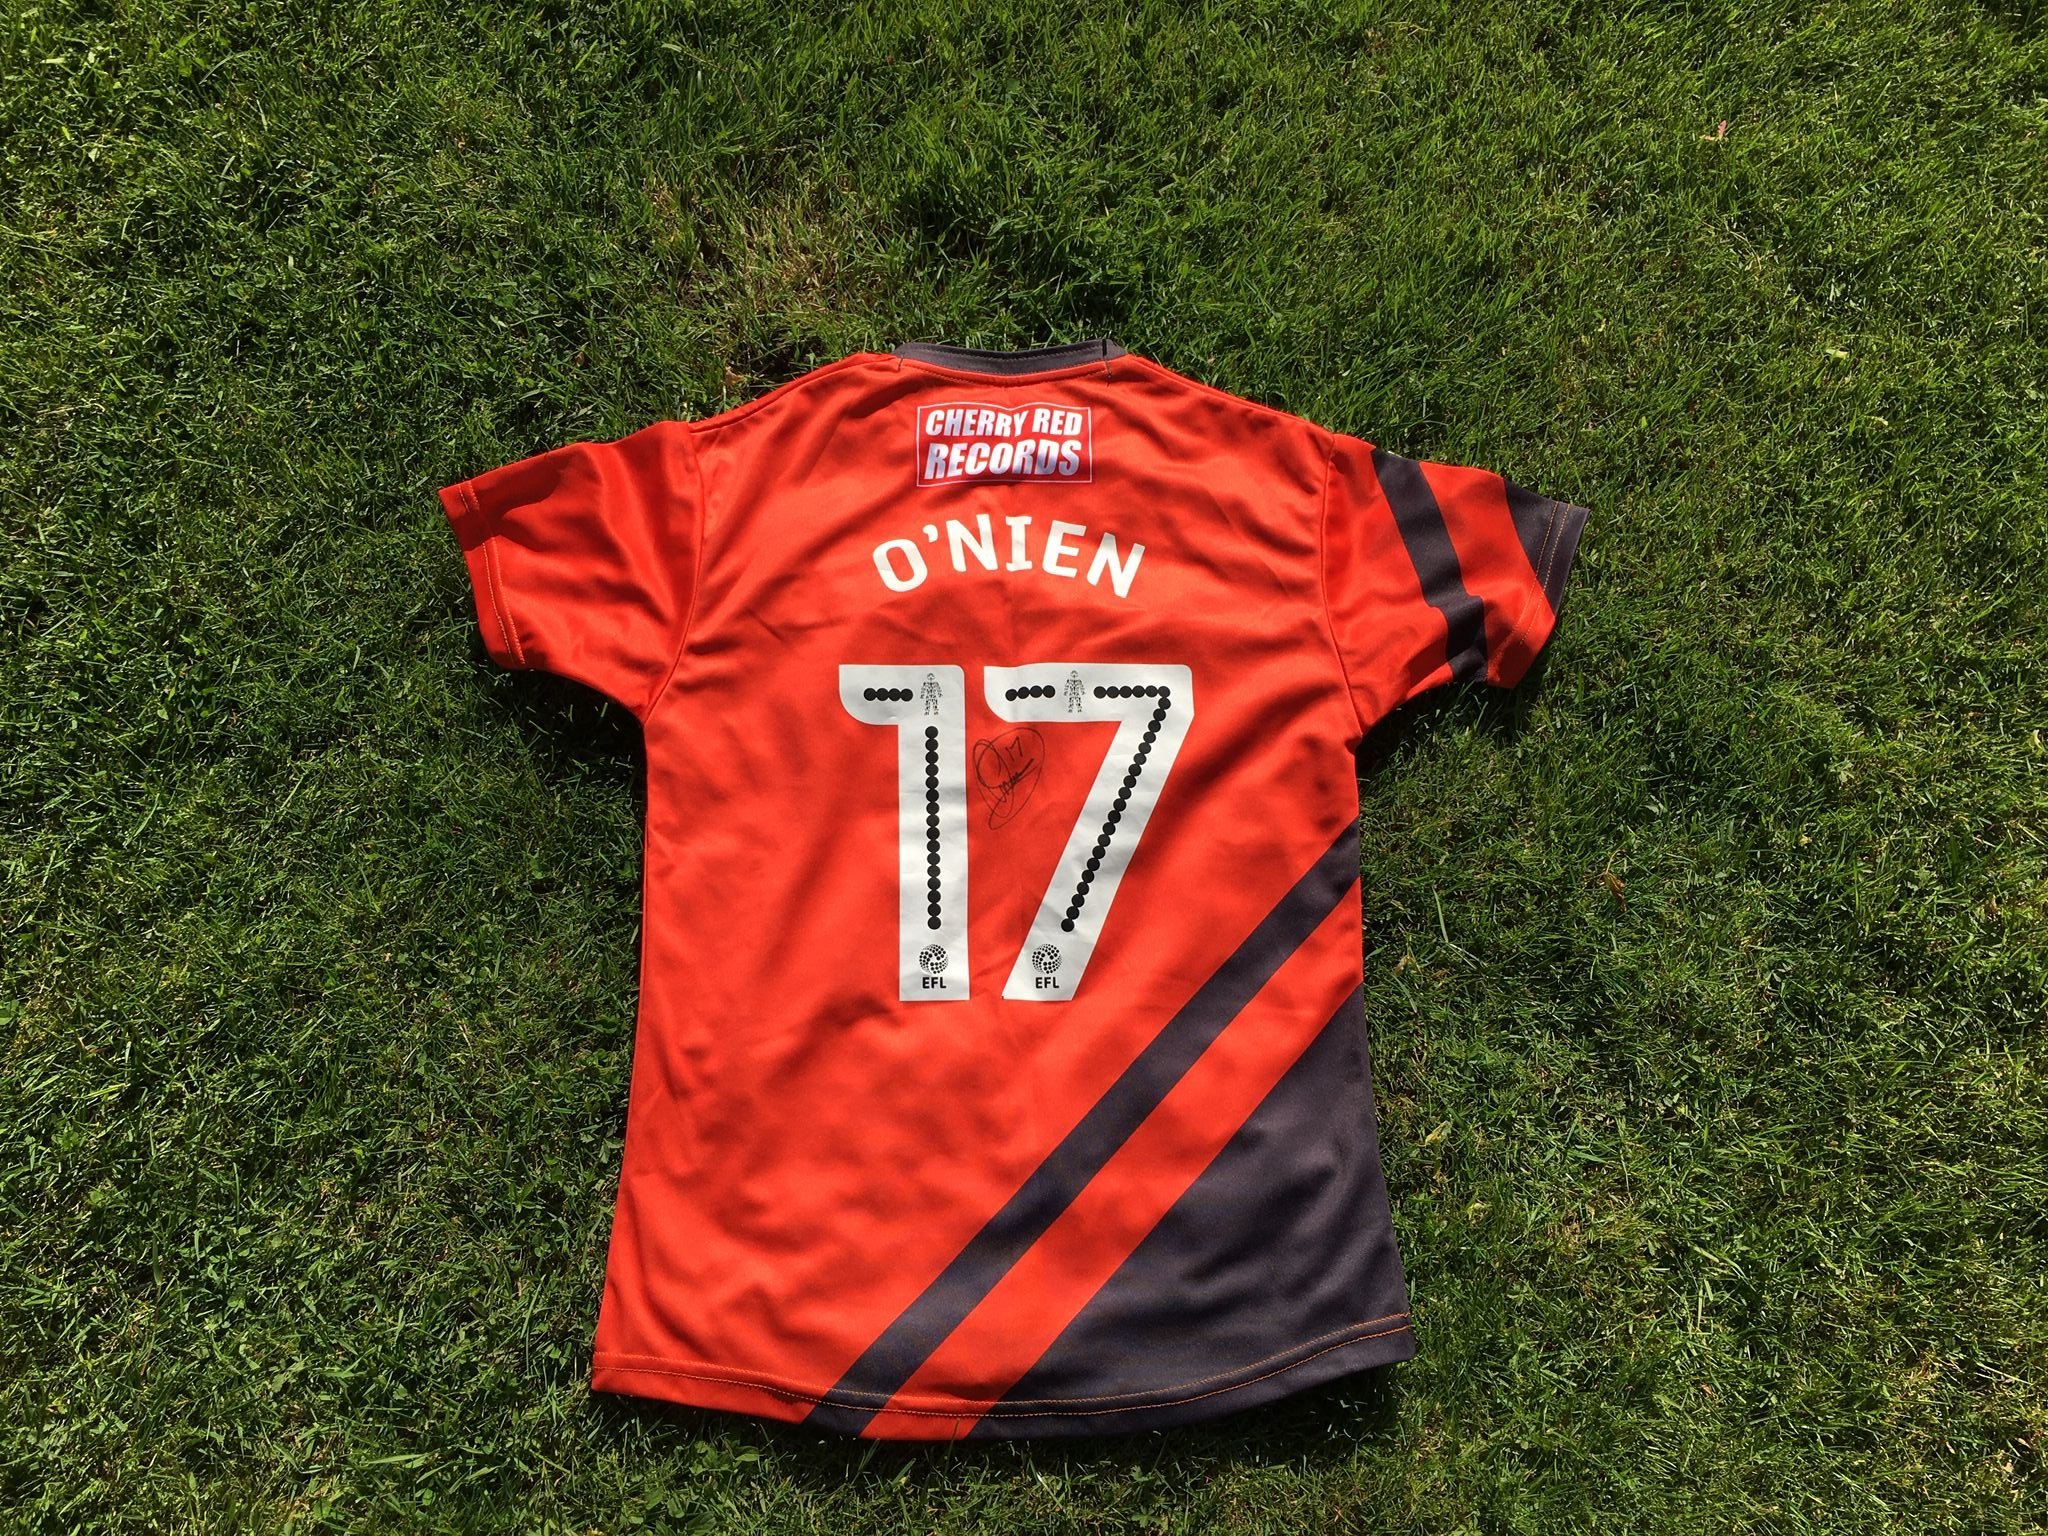 The signed Luke ONien away shirt from the 2017/18 season